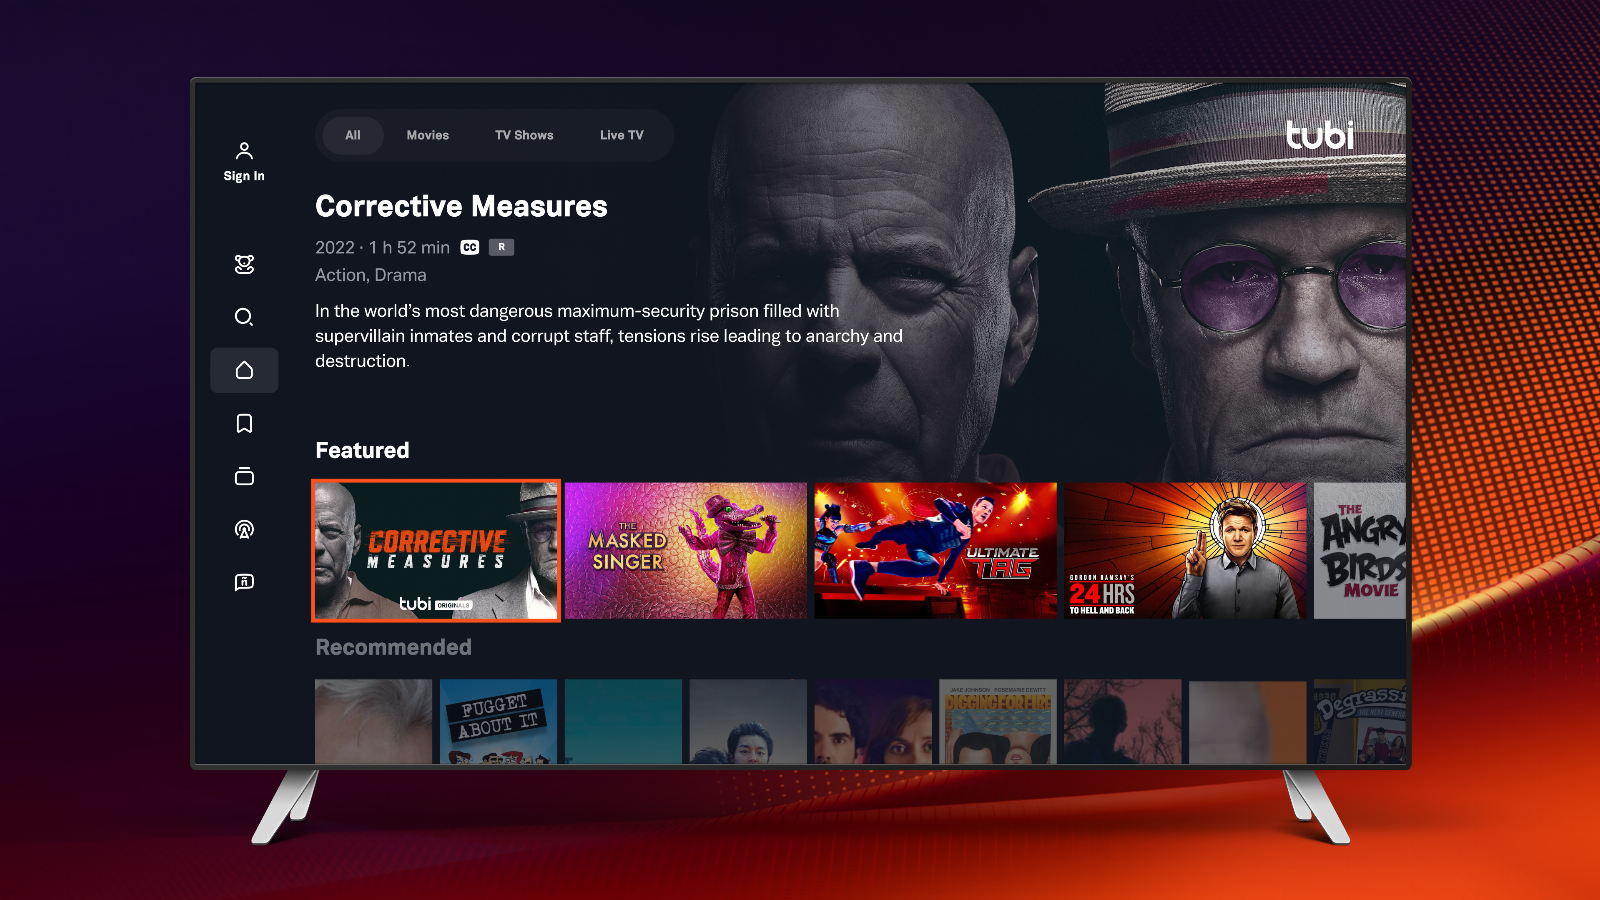 Tubi sees impressive growth, with over 74M monthly active users